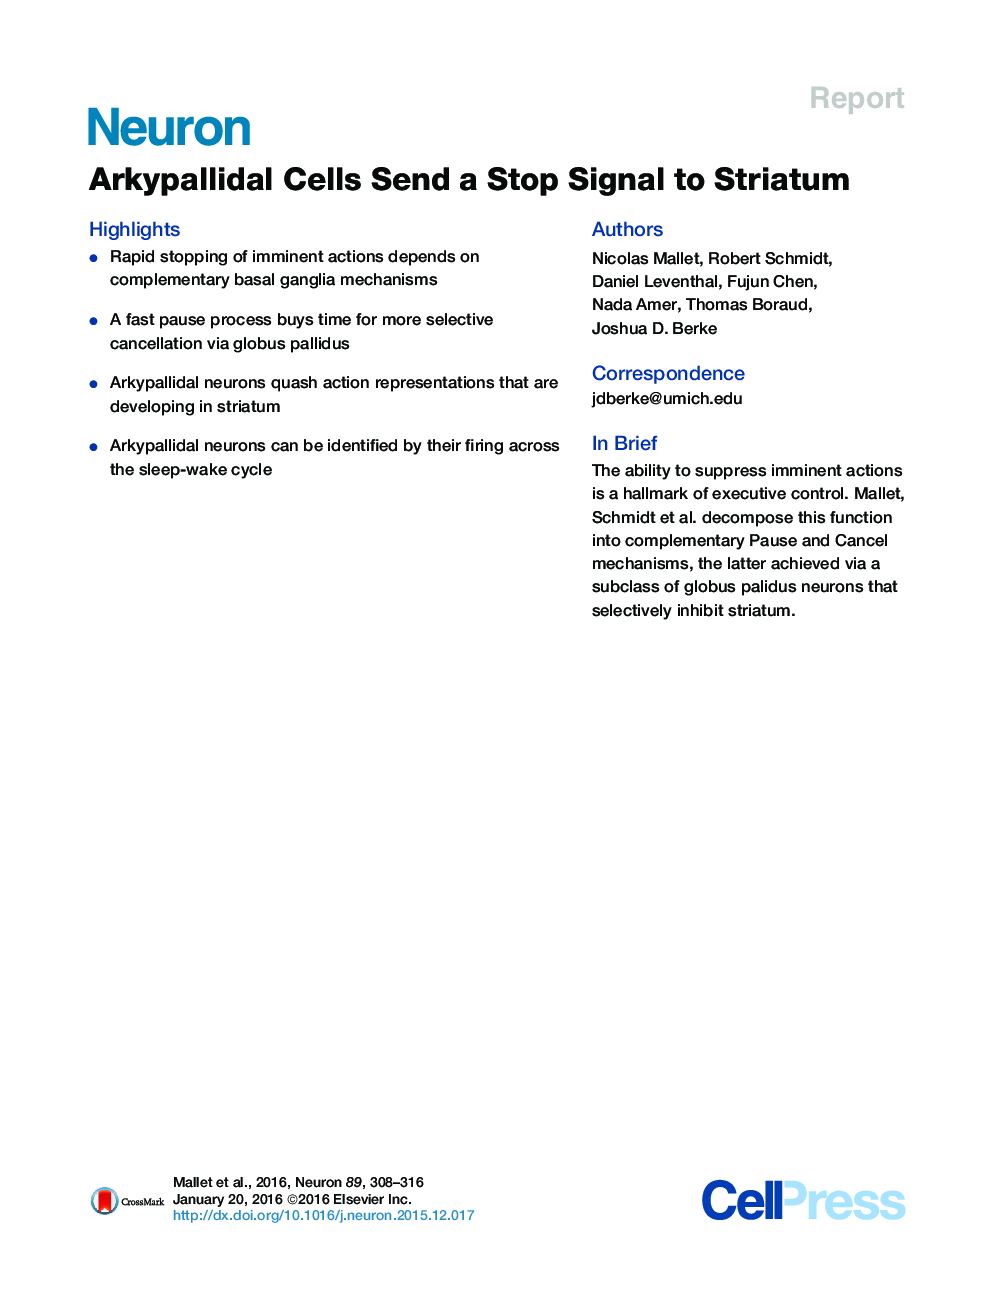 Arkypallidal Cells Send a Stop Signal to Striatum